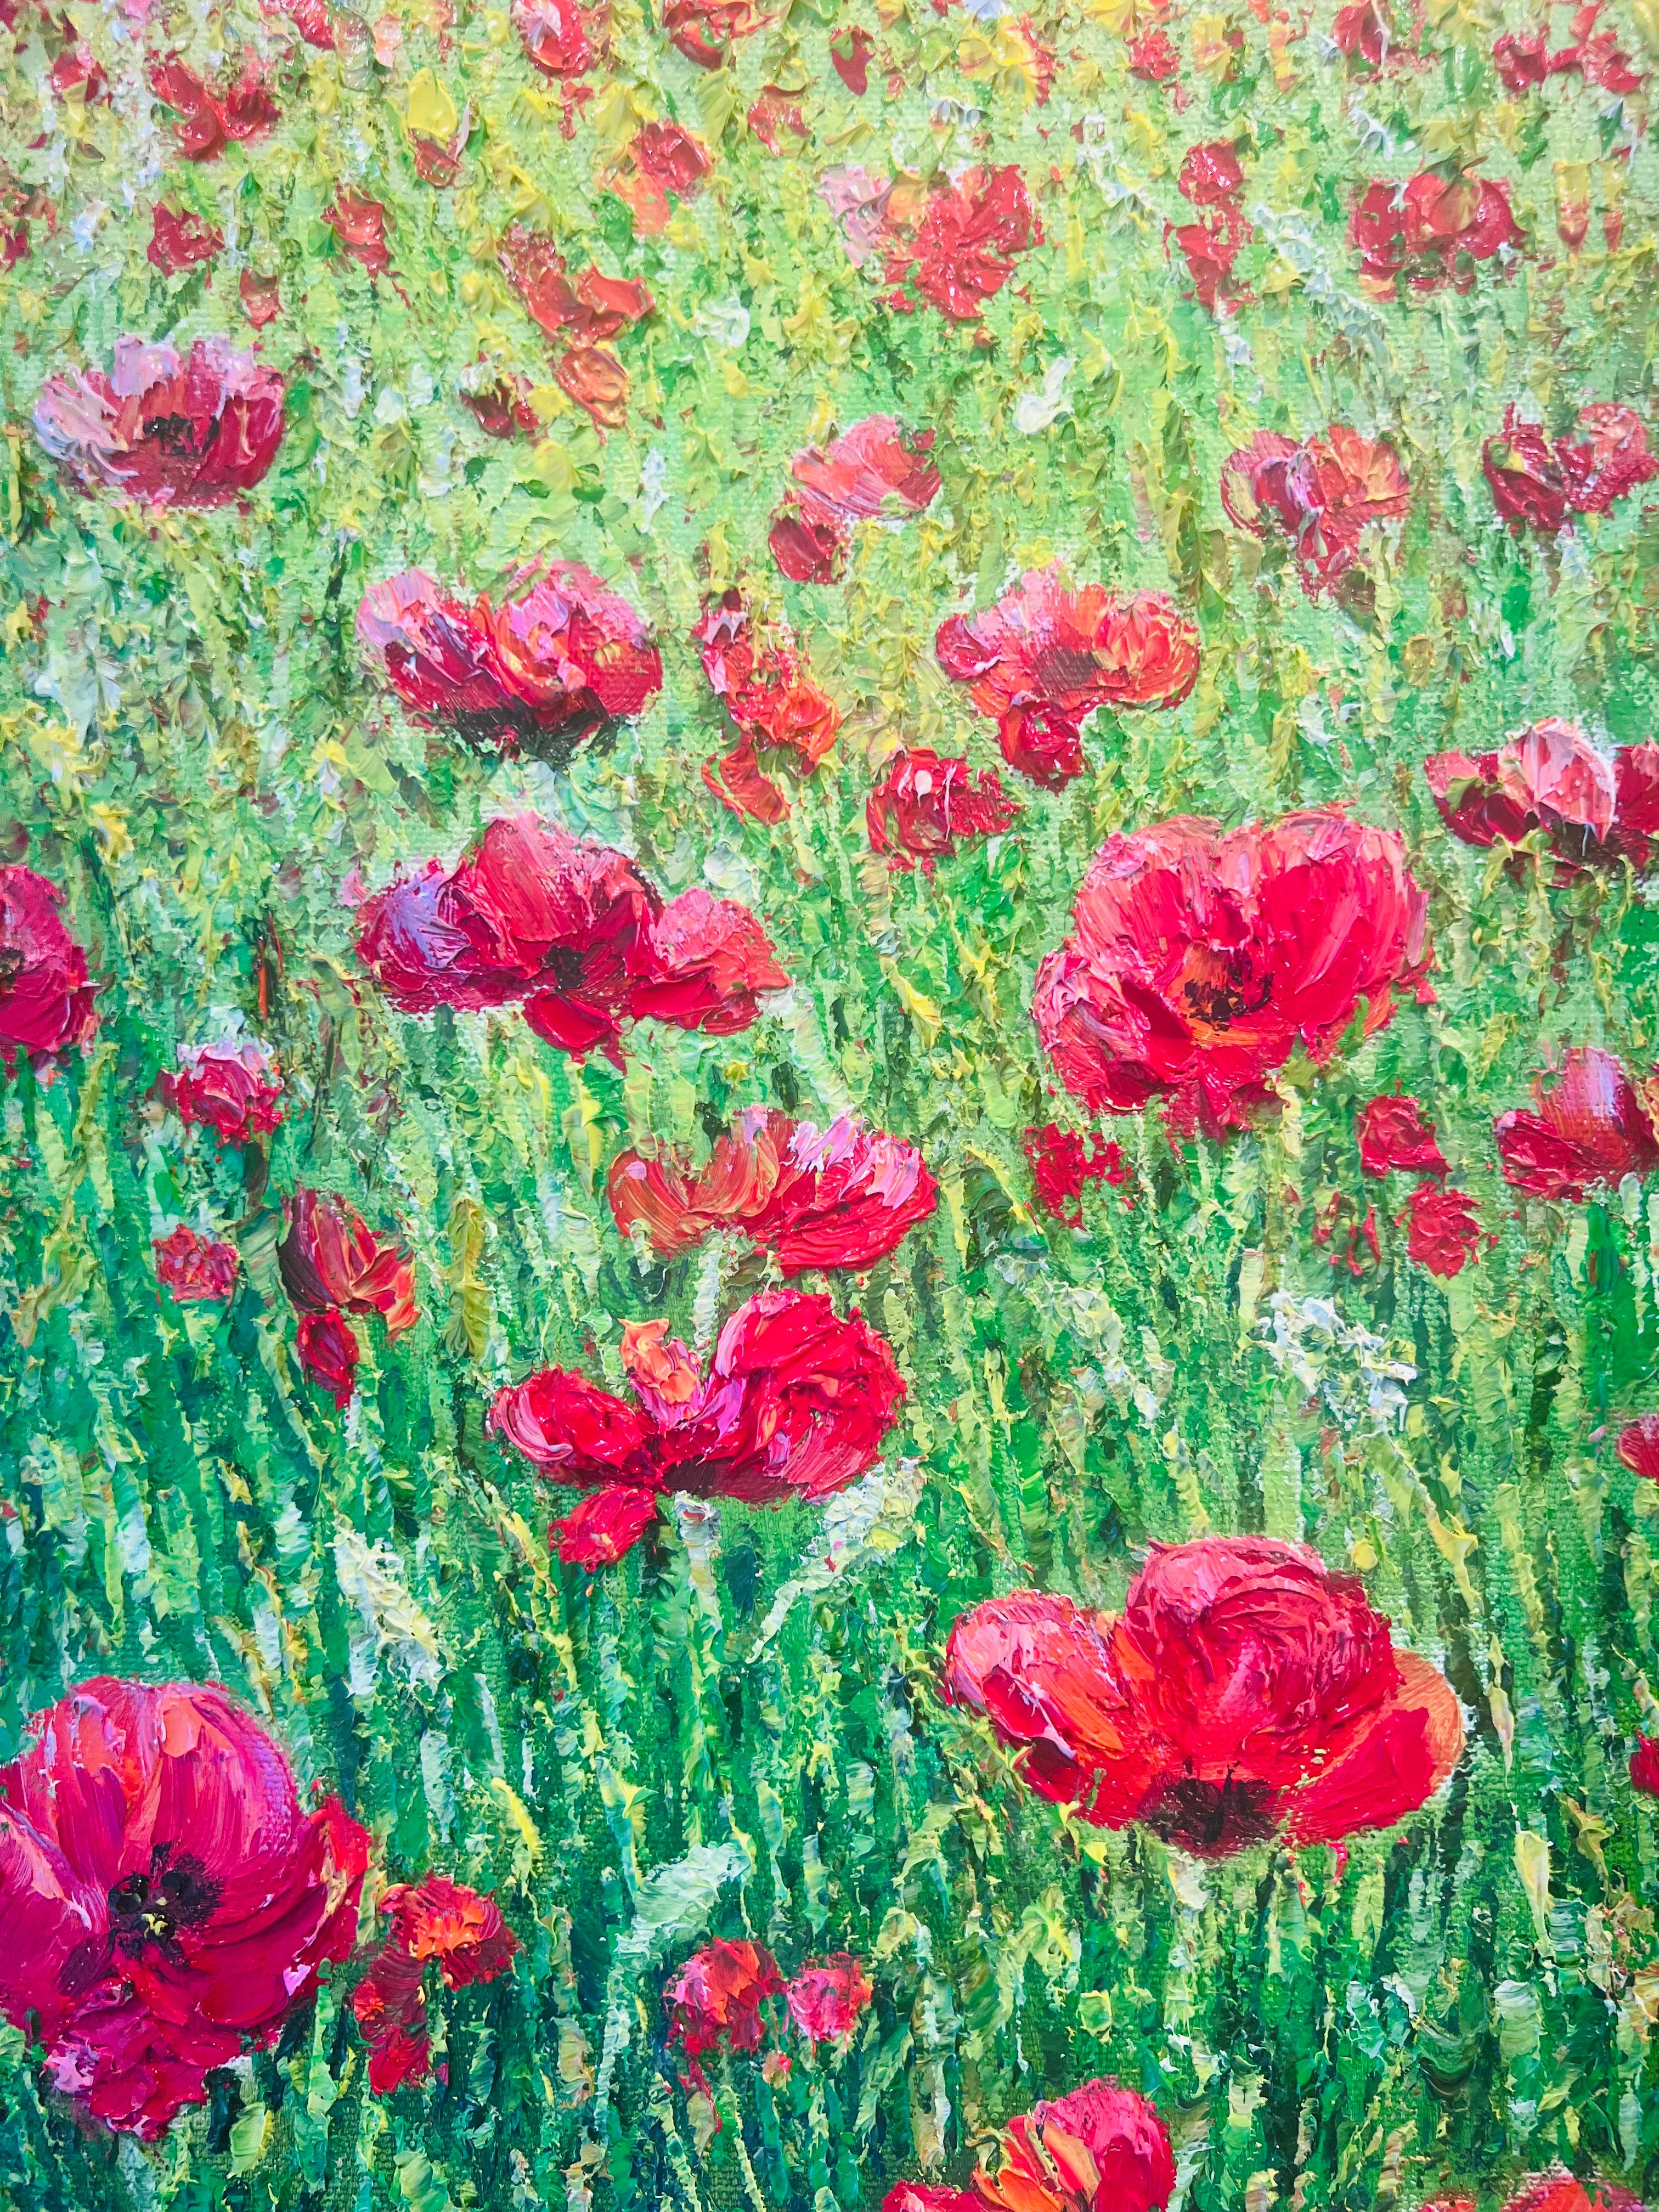 Love's Awakening-original realism landscape floral oil painting-contemporary Art - Painting by Sophia Chalklen